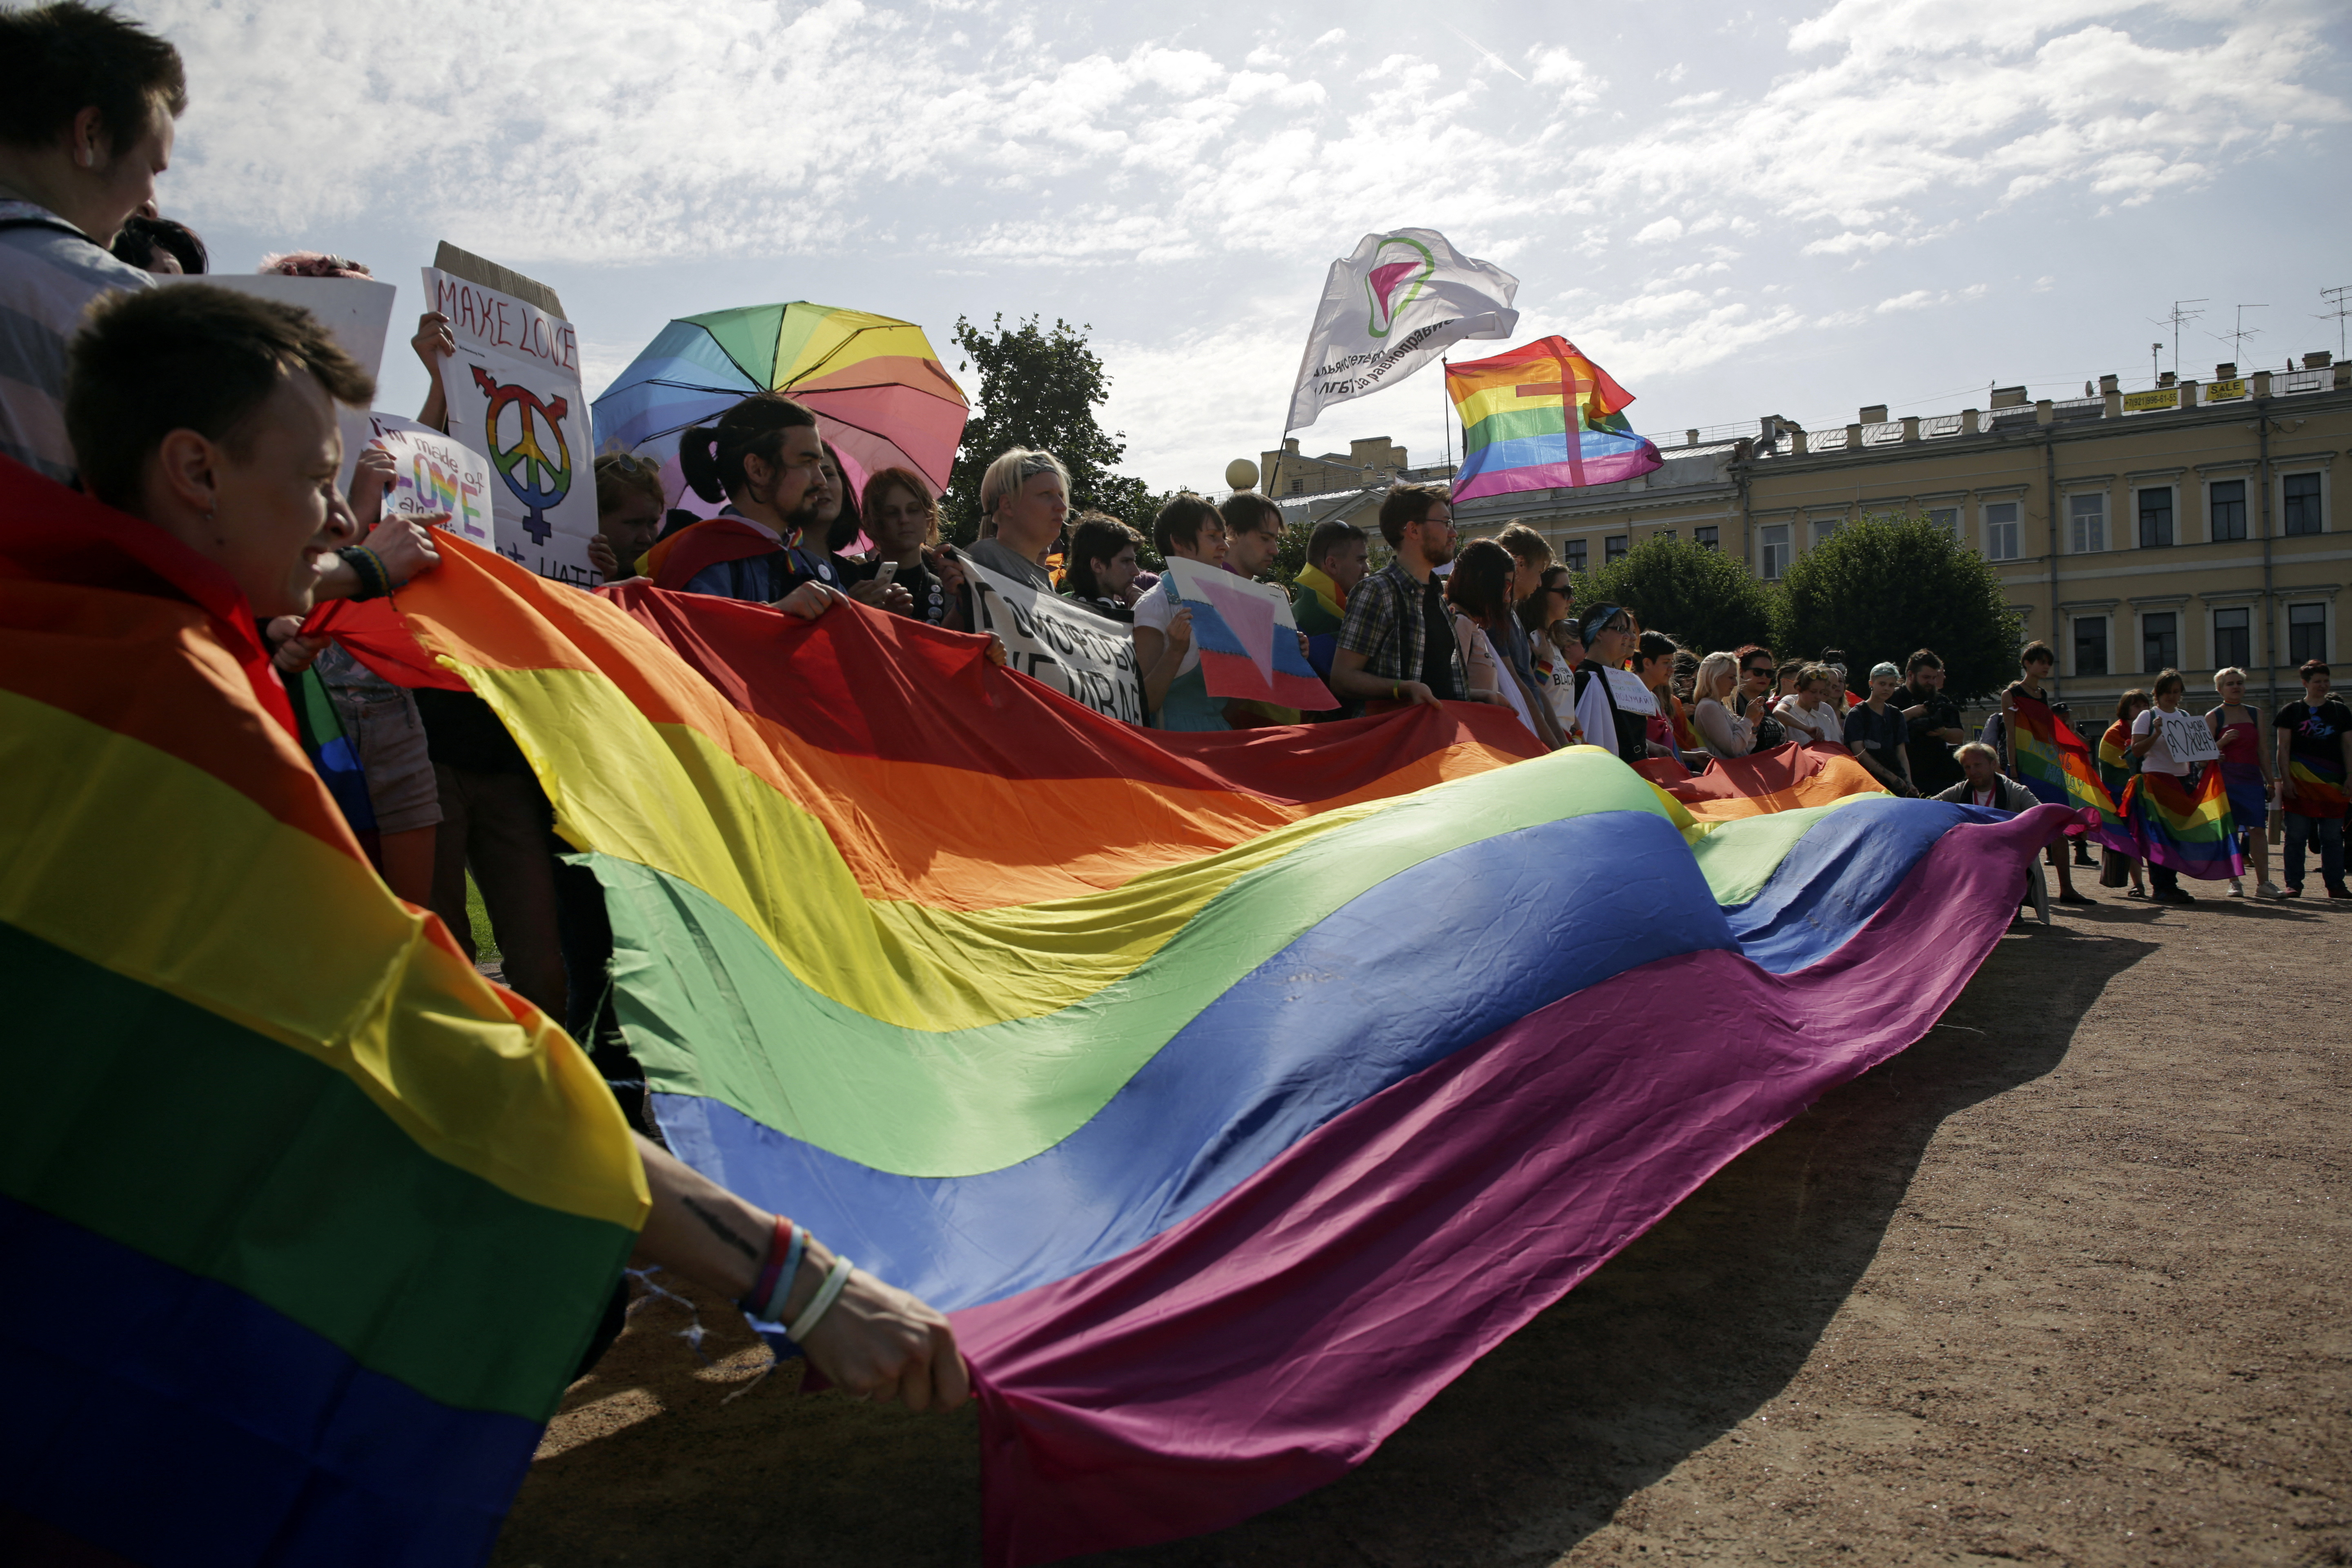 People take part in the LGBT (lesbian, gay, bisexual, and transgender) community rally 